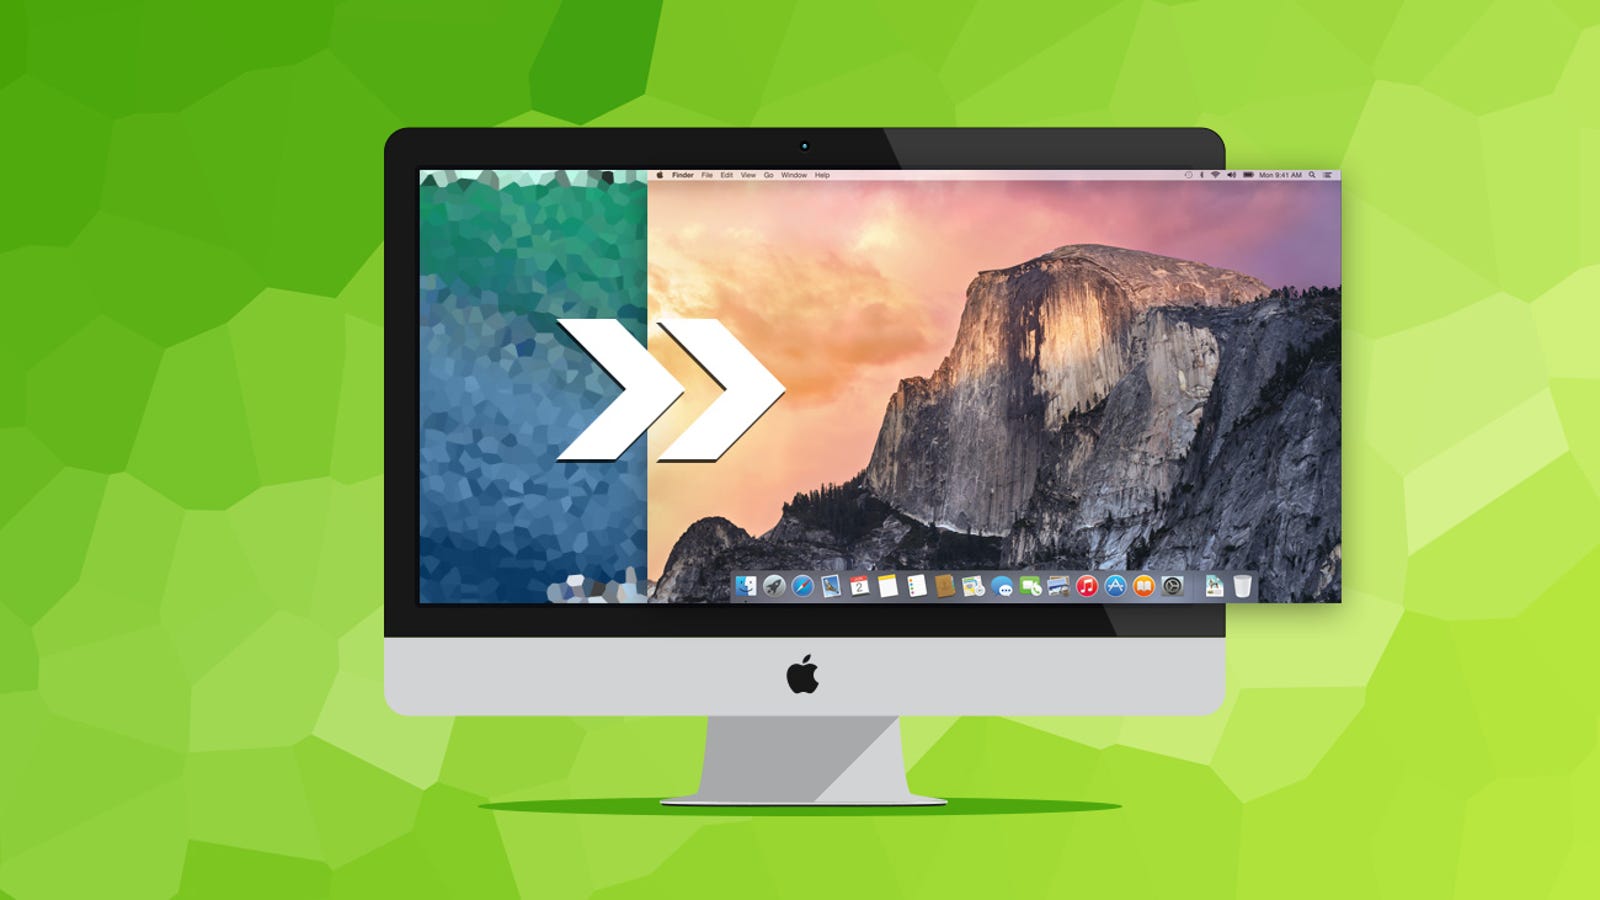 How to change app icons on macbook air